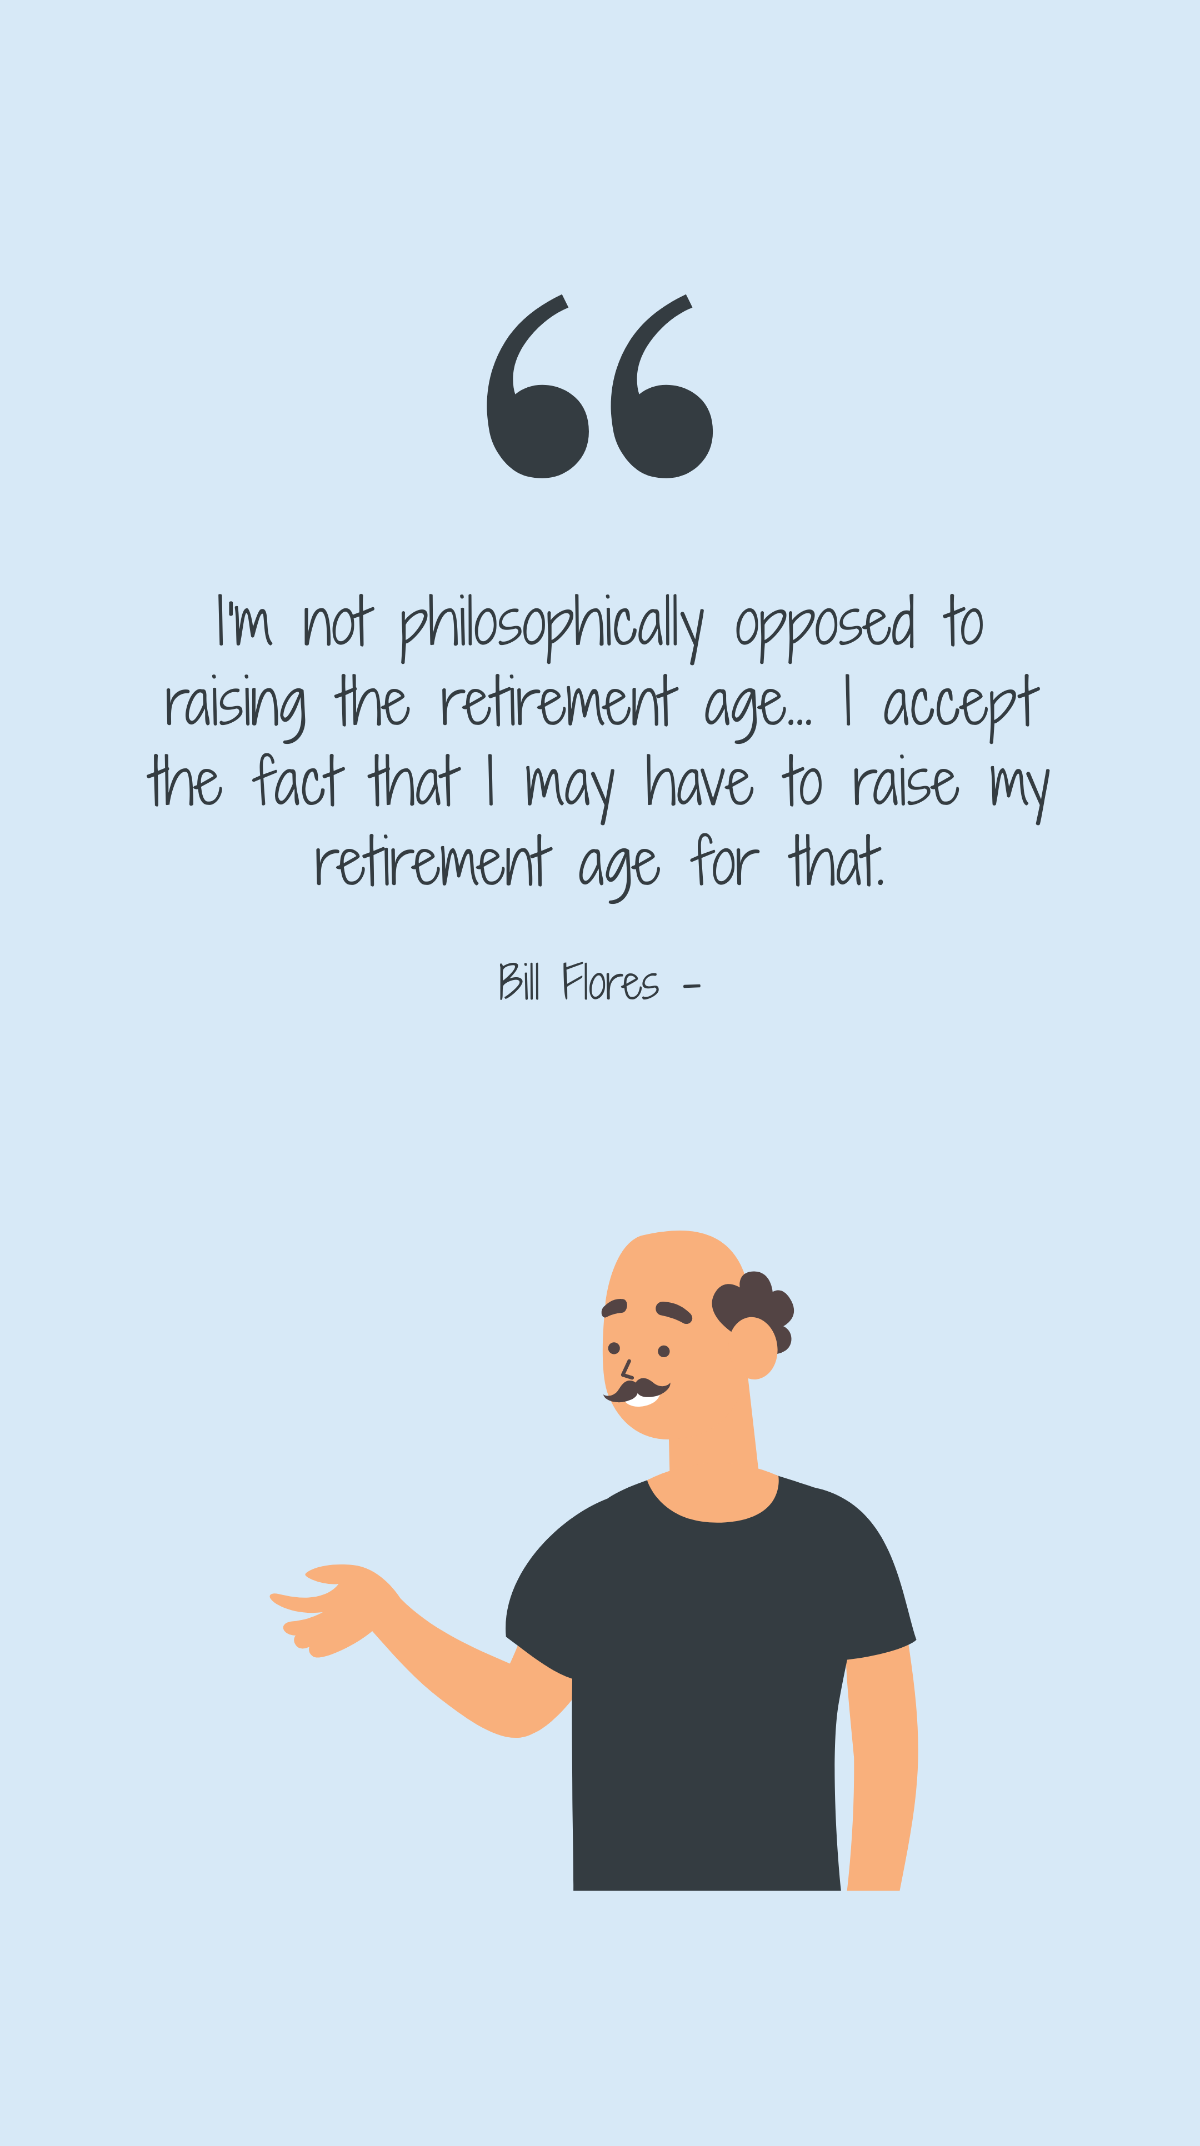 Bill Flores - I'm not philosophically opposed to raising the retirement age... I accept the fact that I may have to raise my retirement age for that. Template